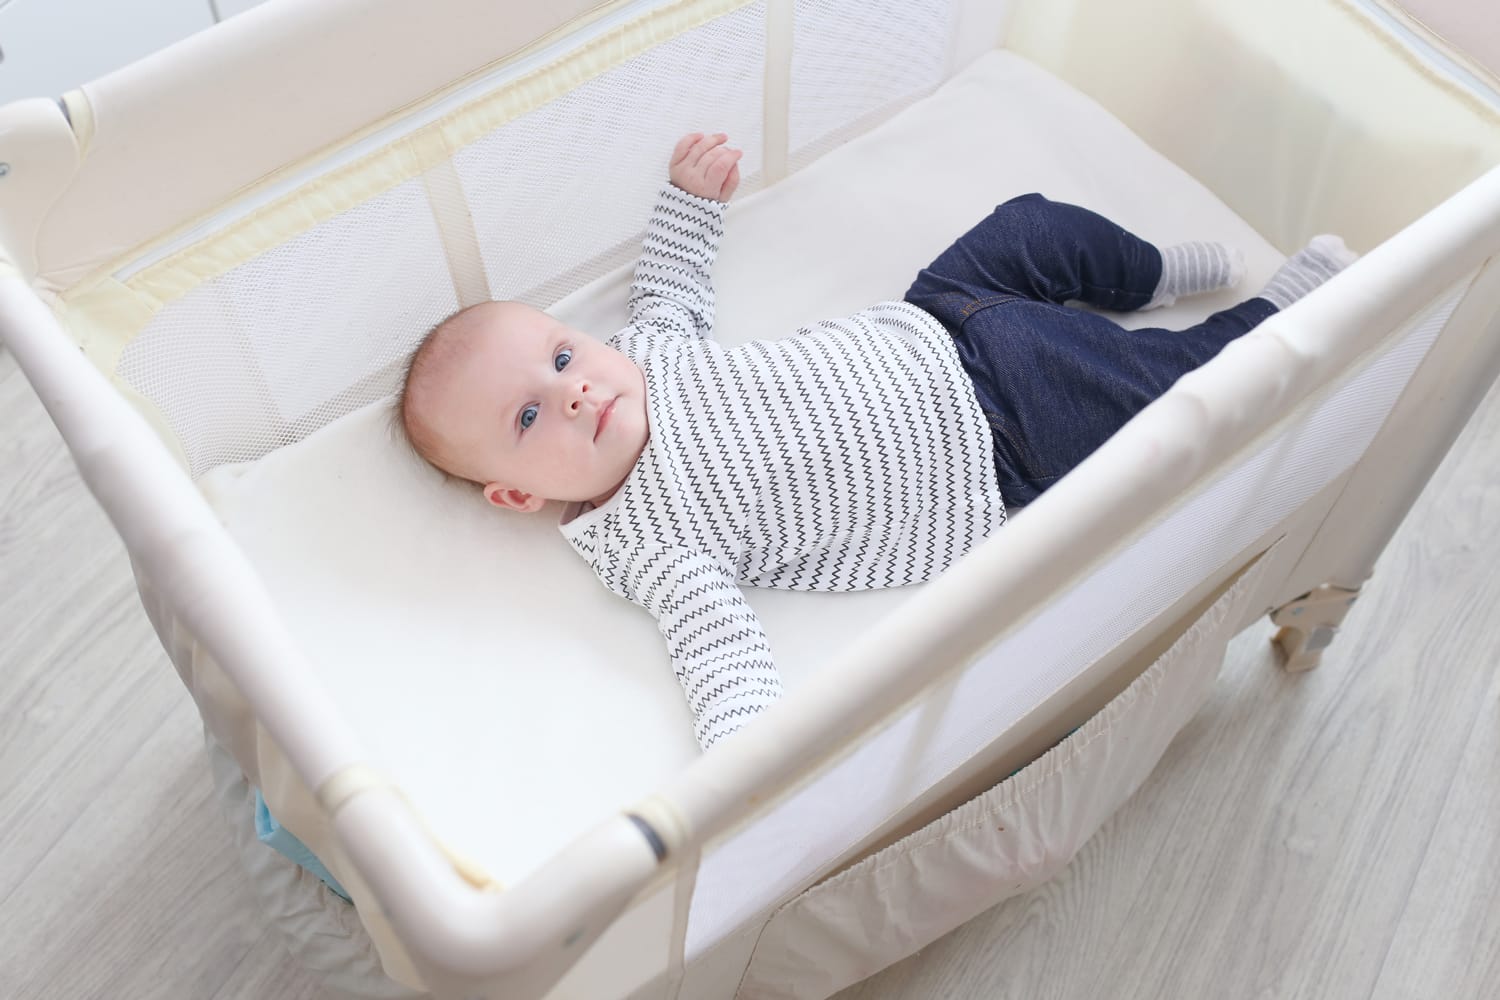 Windream Portable Crib for Bedroom/Travel Blue Star-Newborn Baby Bassinet for Lounger/Nest/Sleep Pod/Cot Bed Breathable & Hypoallergenic Co-Sleeping Baby 0-24 Months 